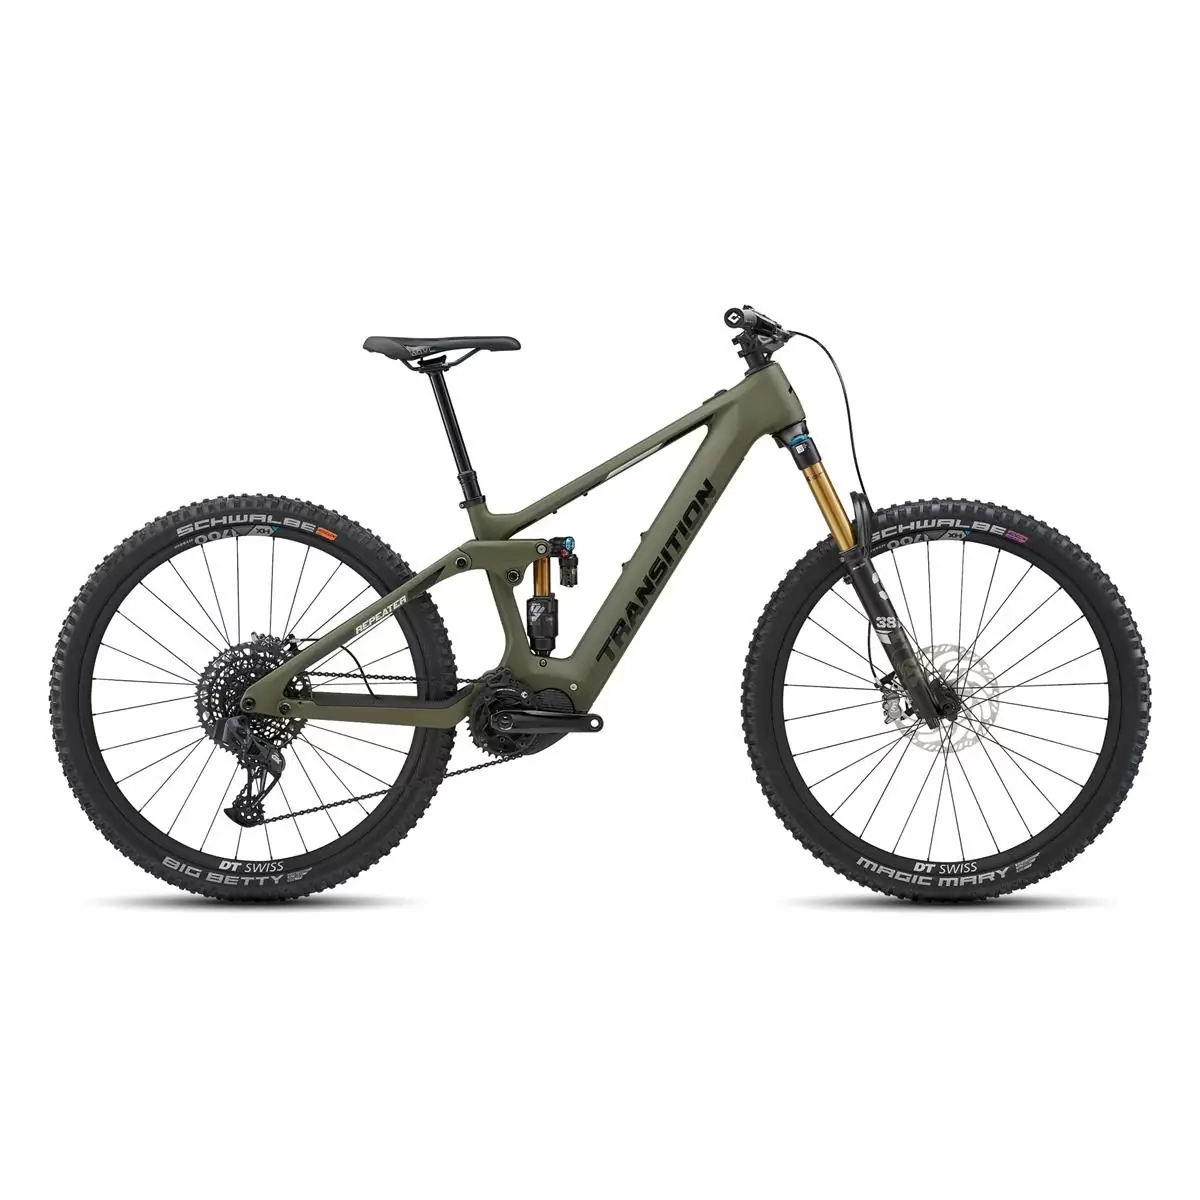 Repeater Carbon AXS 29'' 160mm 12s 630Wh Shimano EP8 Mossy Green Größe L - image